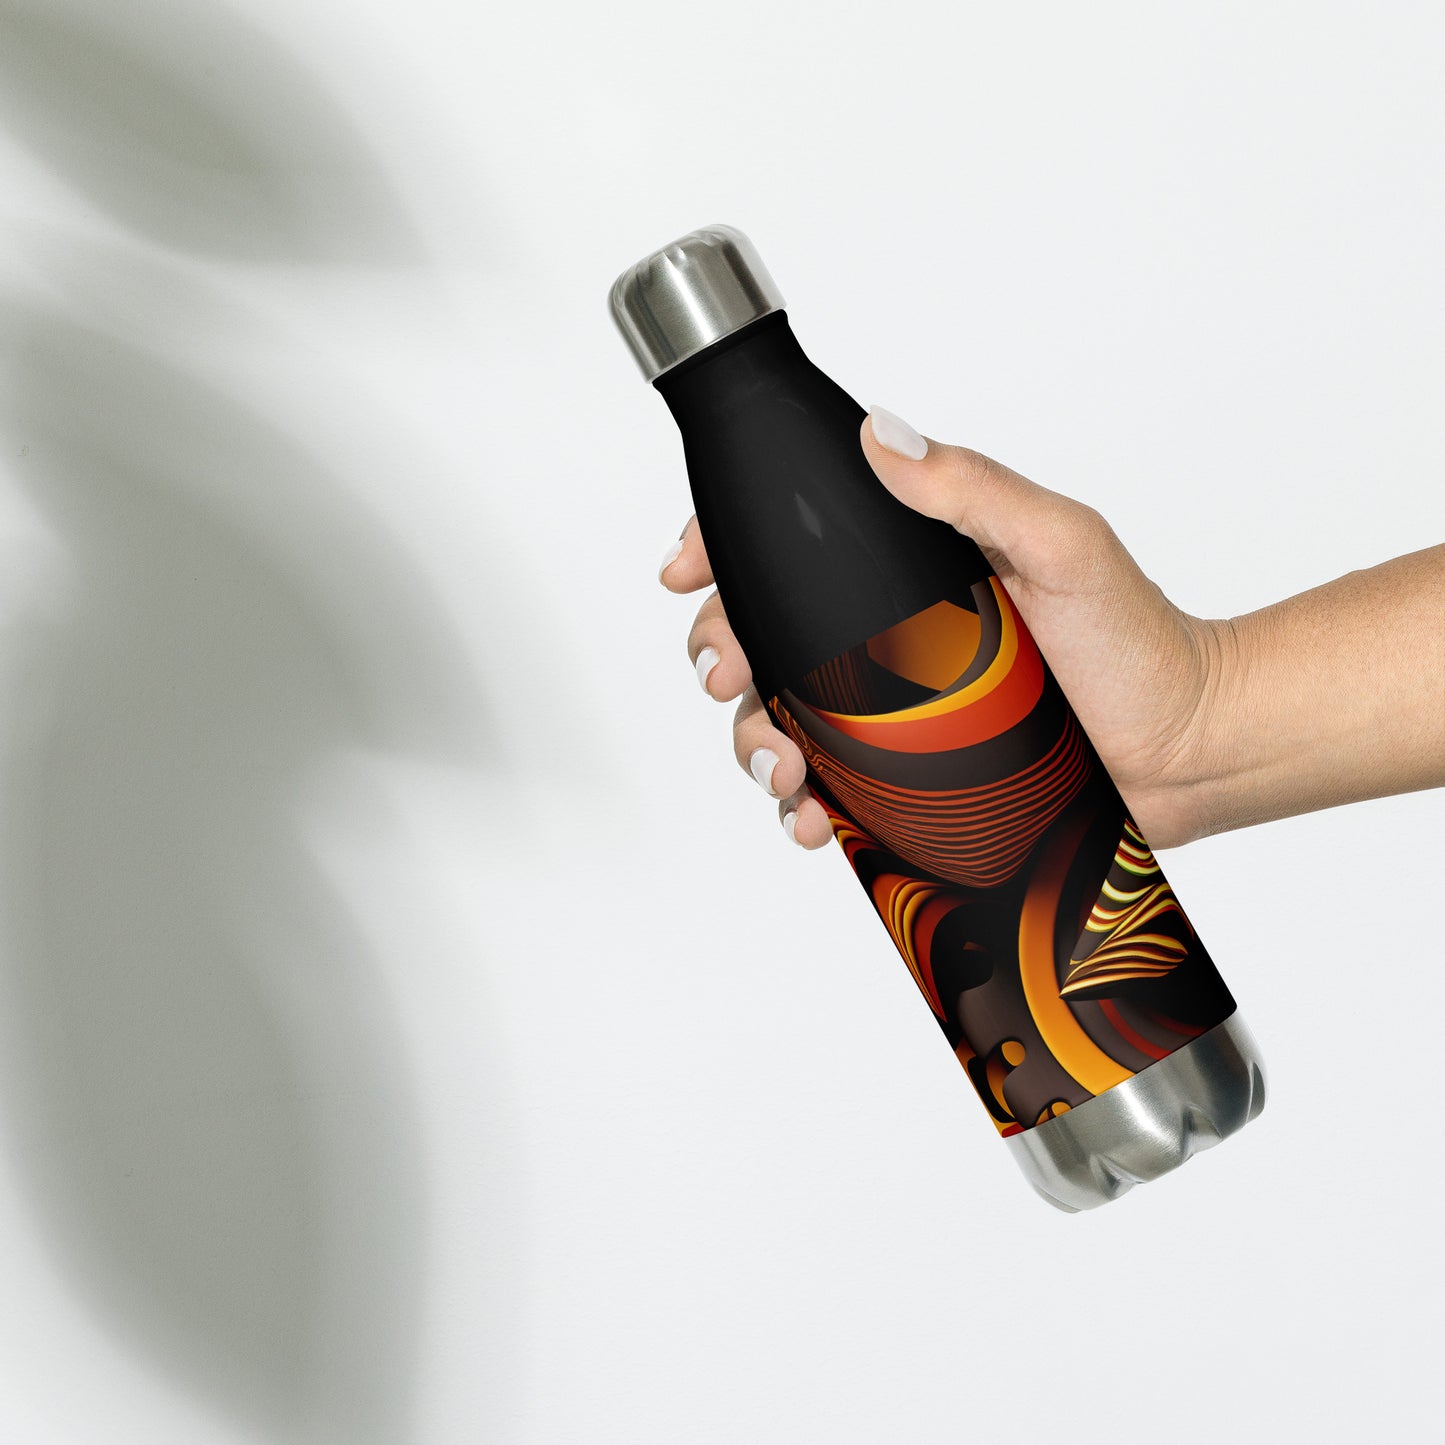 'ANGLED DESIGN': Stainless Steel Water Bottle